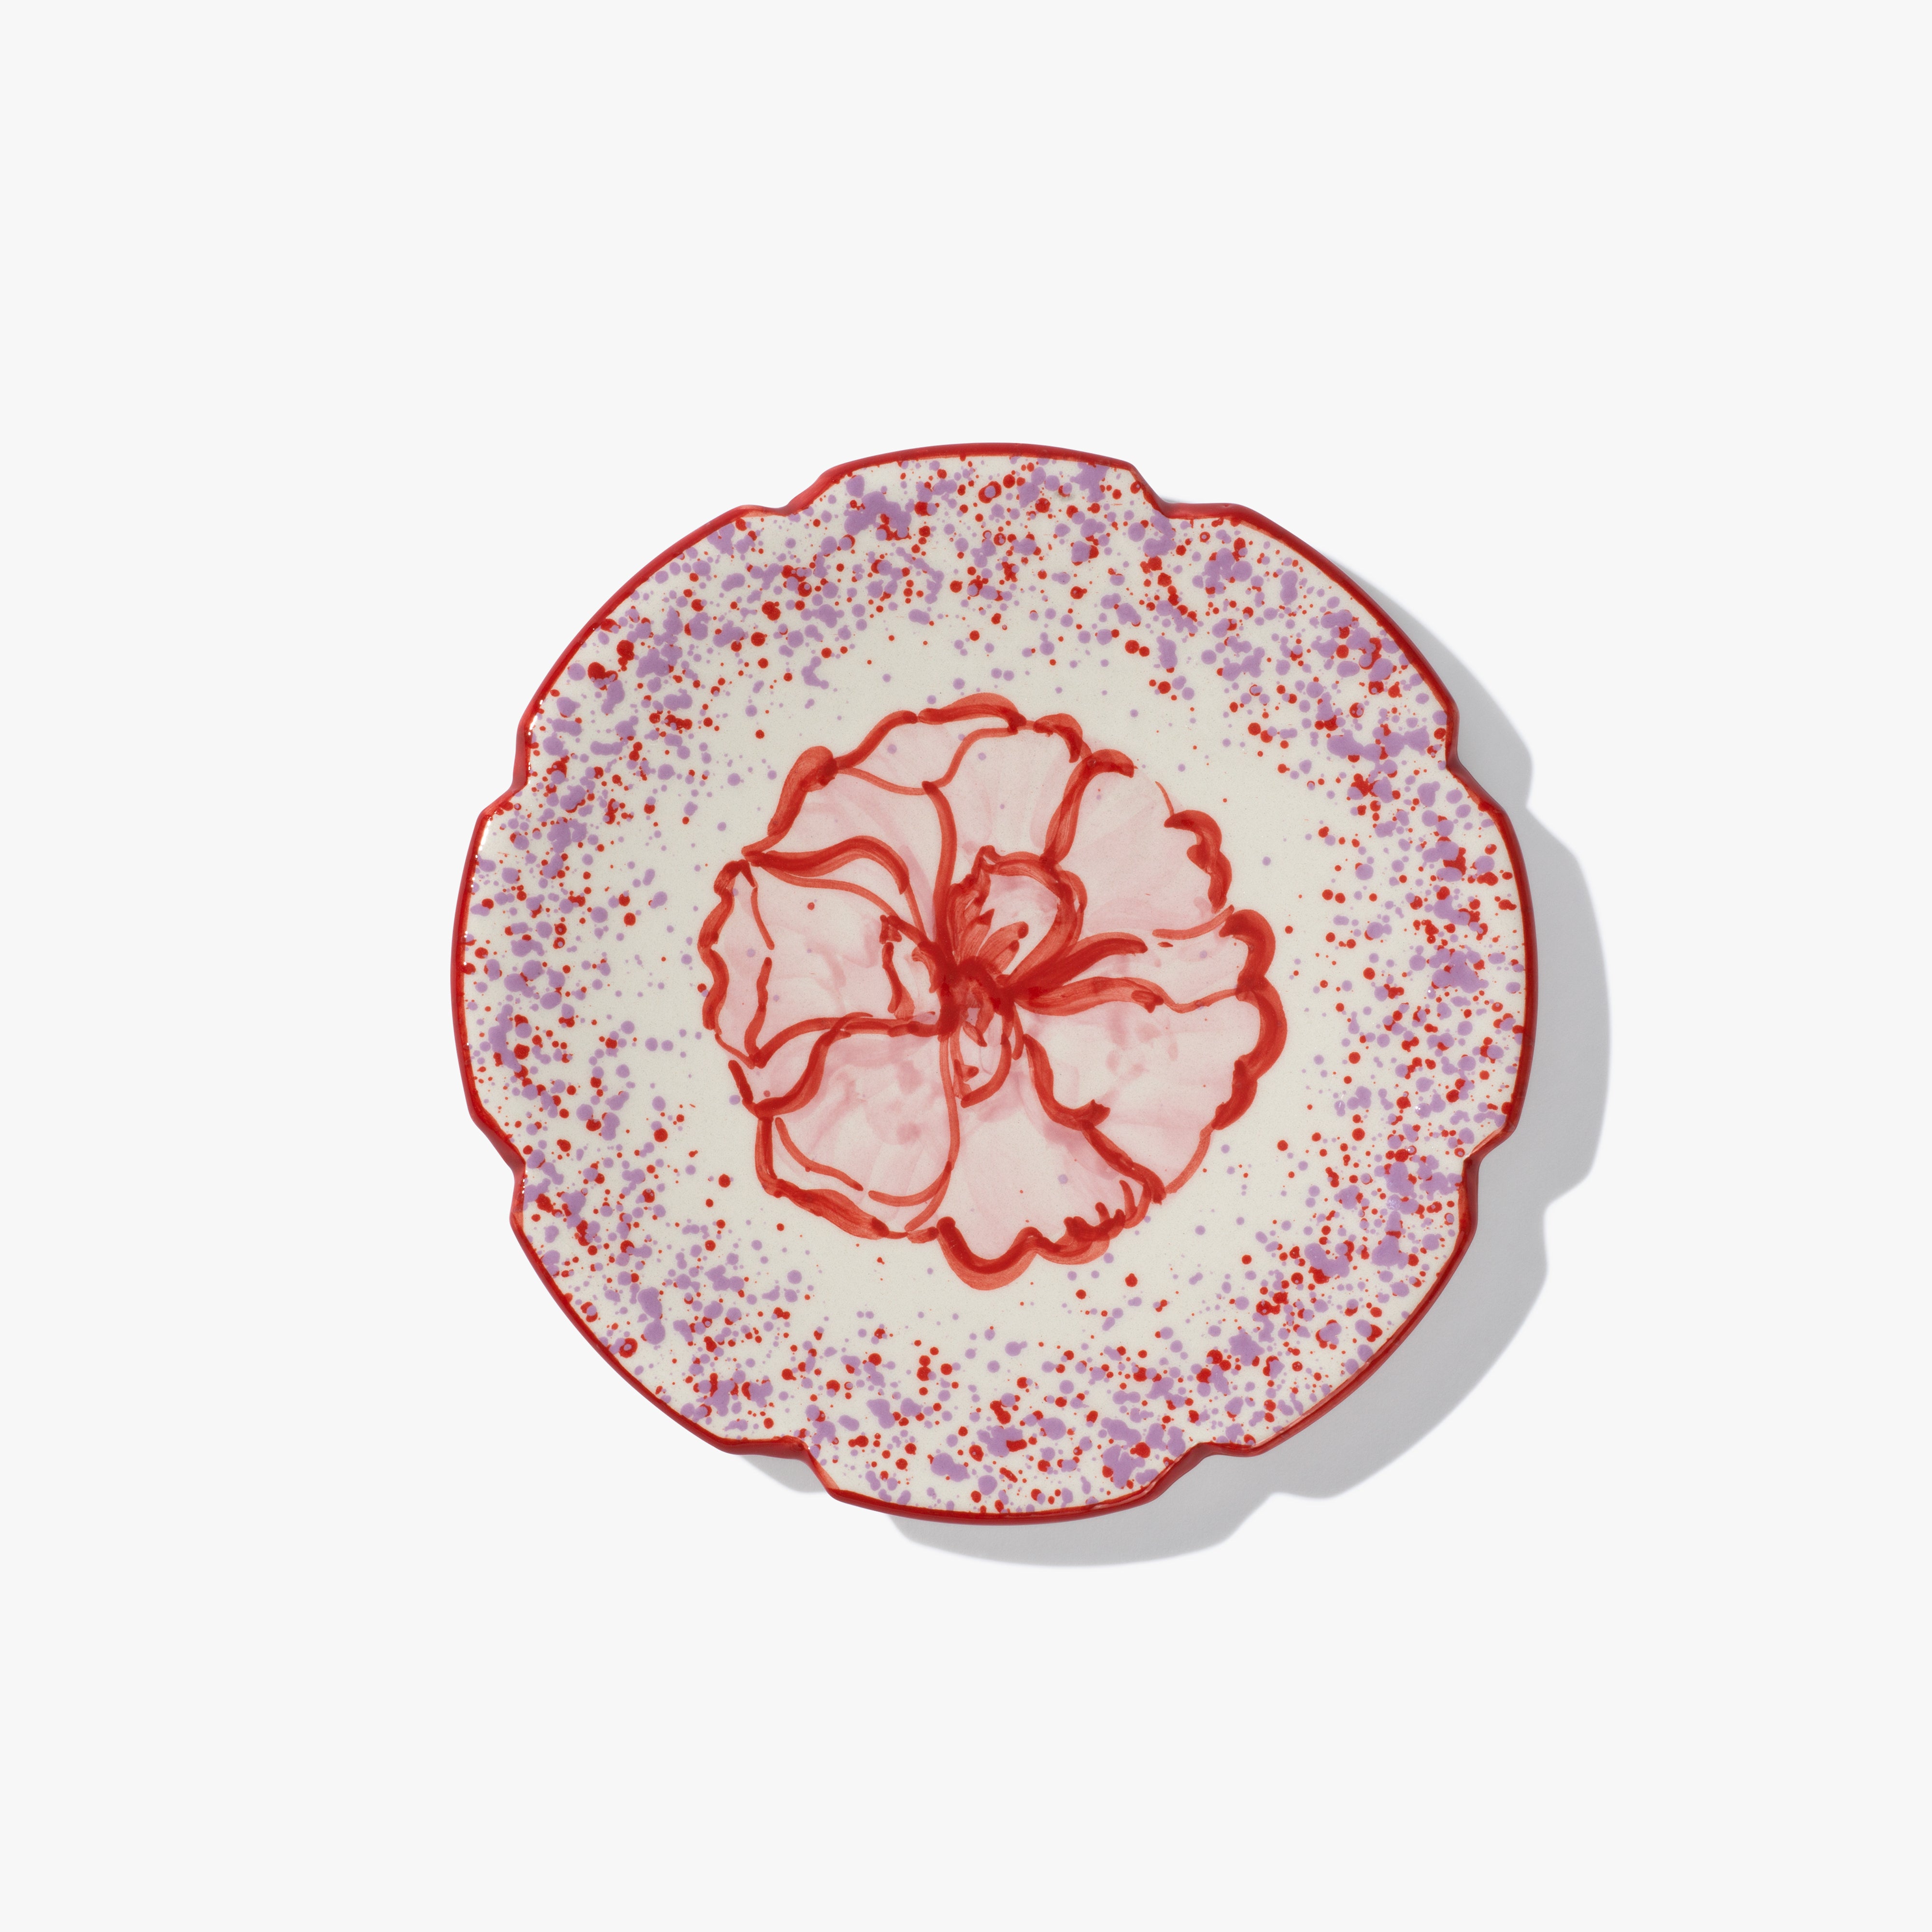 A round ceramic plate with a pink and red flower in the centre. The plate has a scalloped edge, which is also painted red and and red and lilac speckled patten around the flower. 